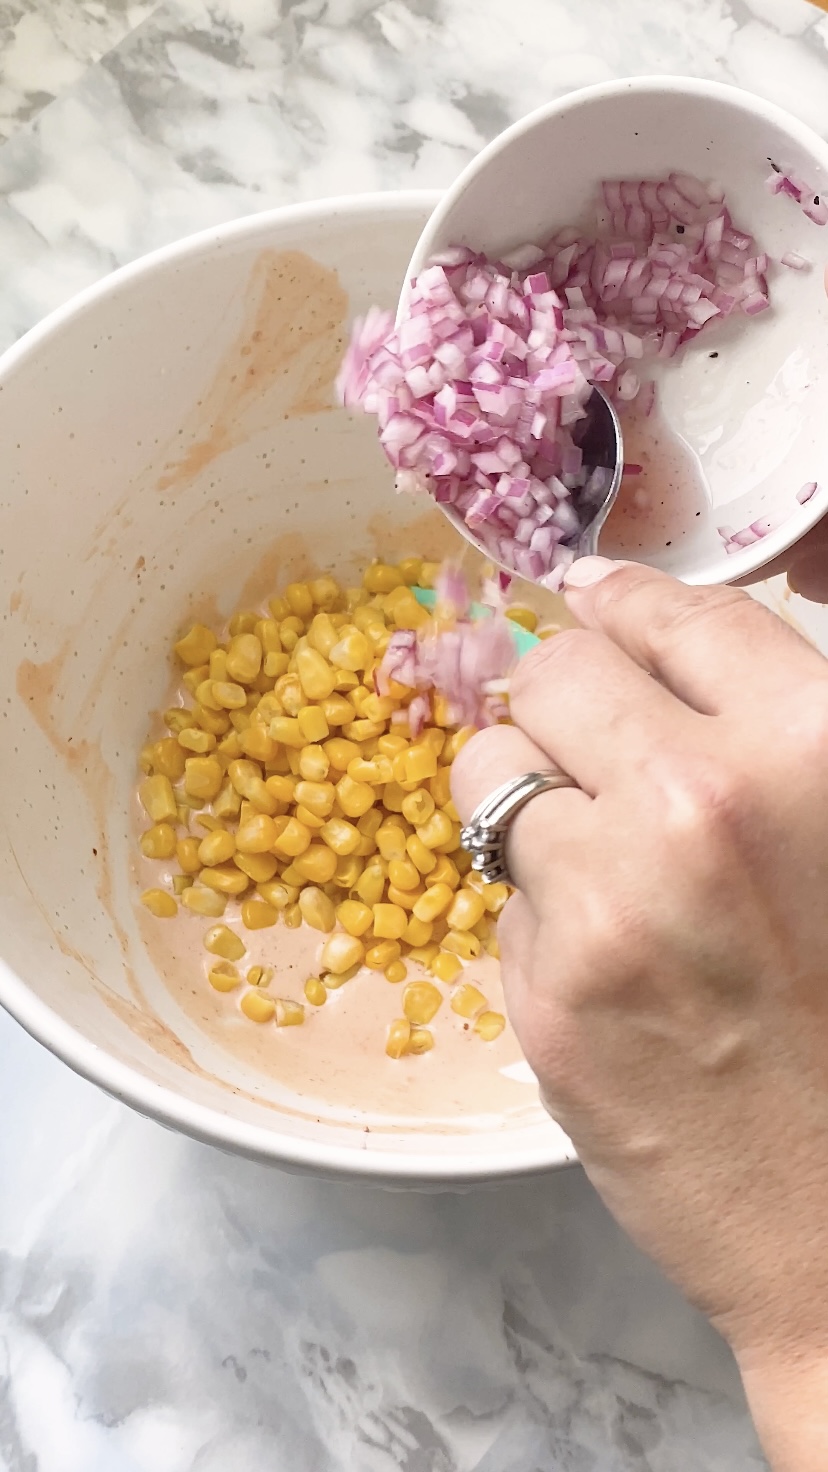 Red onion is added to corn in a bowl.